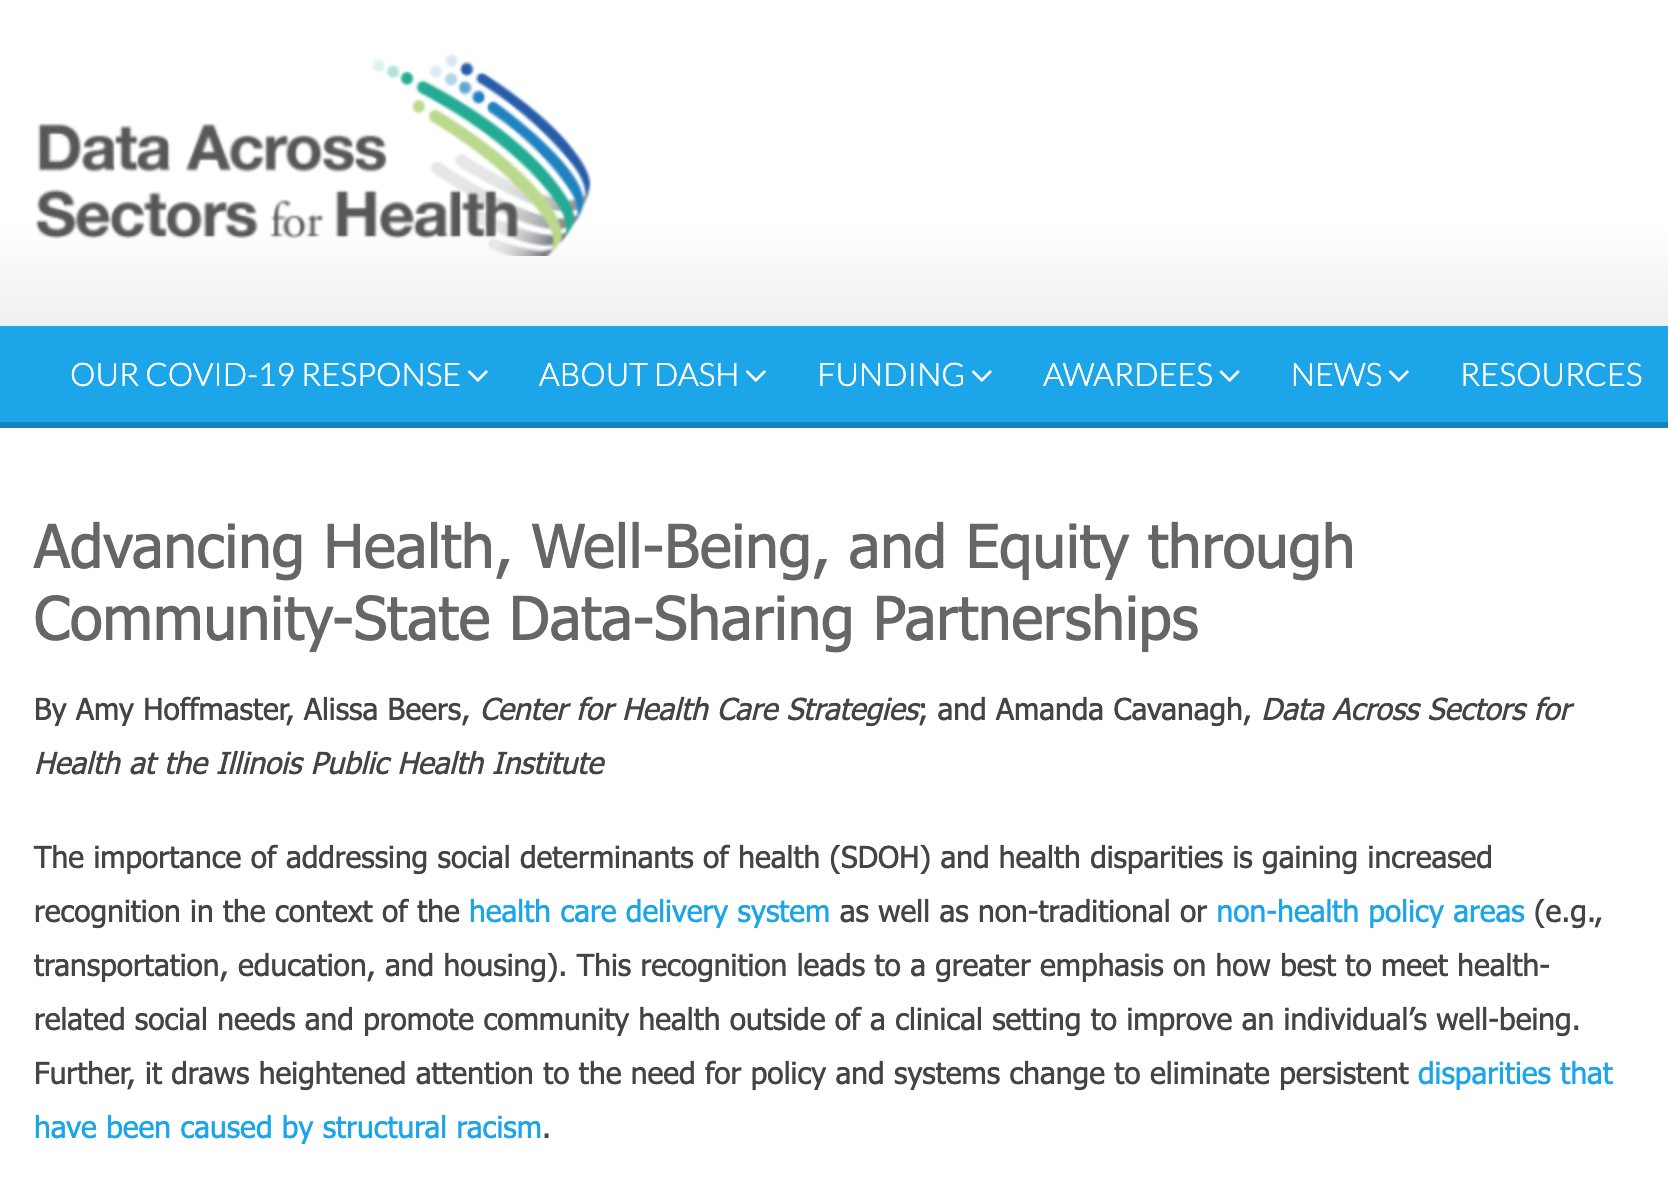 Advancing Health, Well-Being, and Equity through Community-State Data-Sharing Partnerships